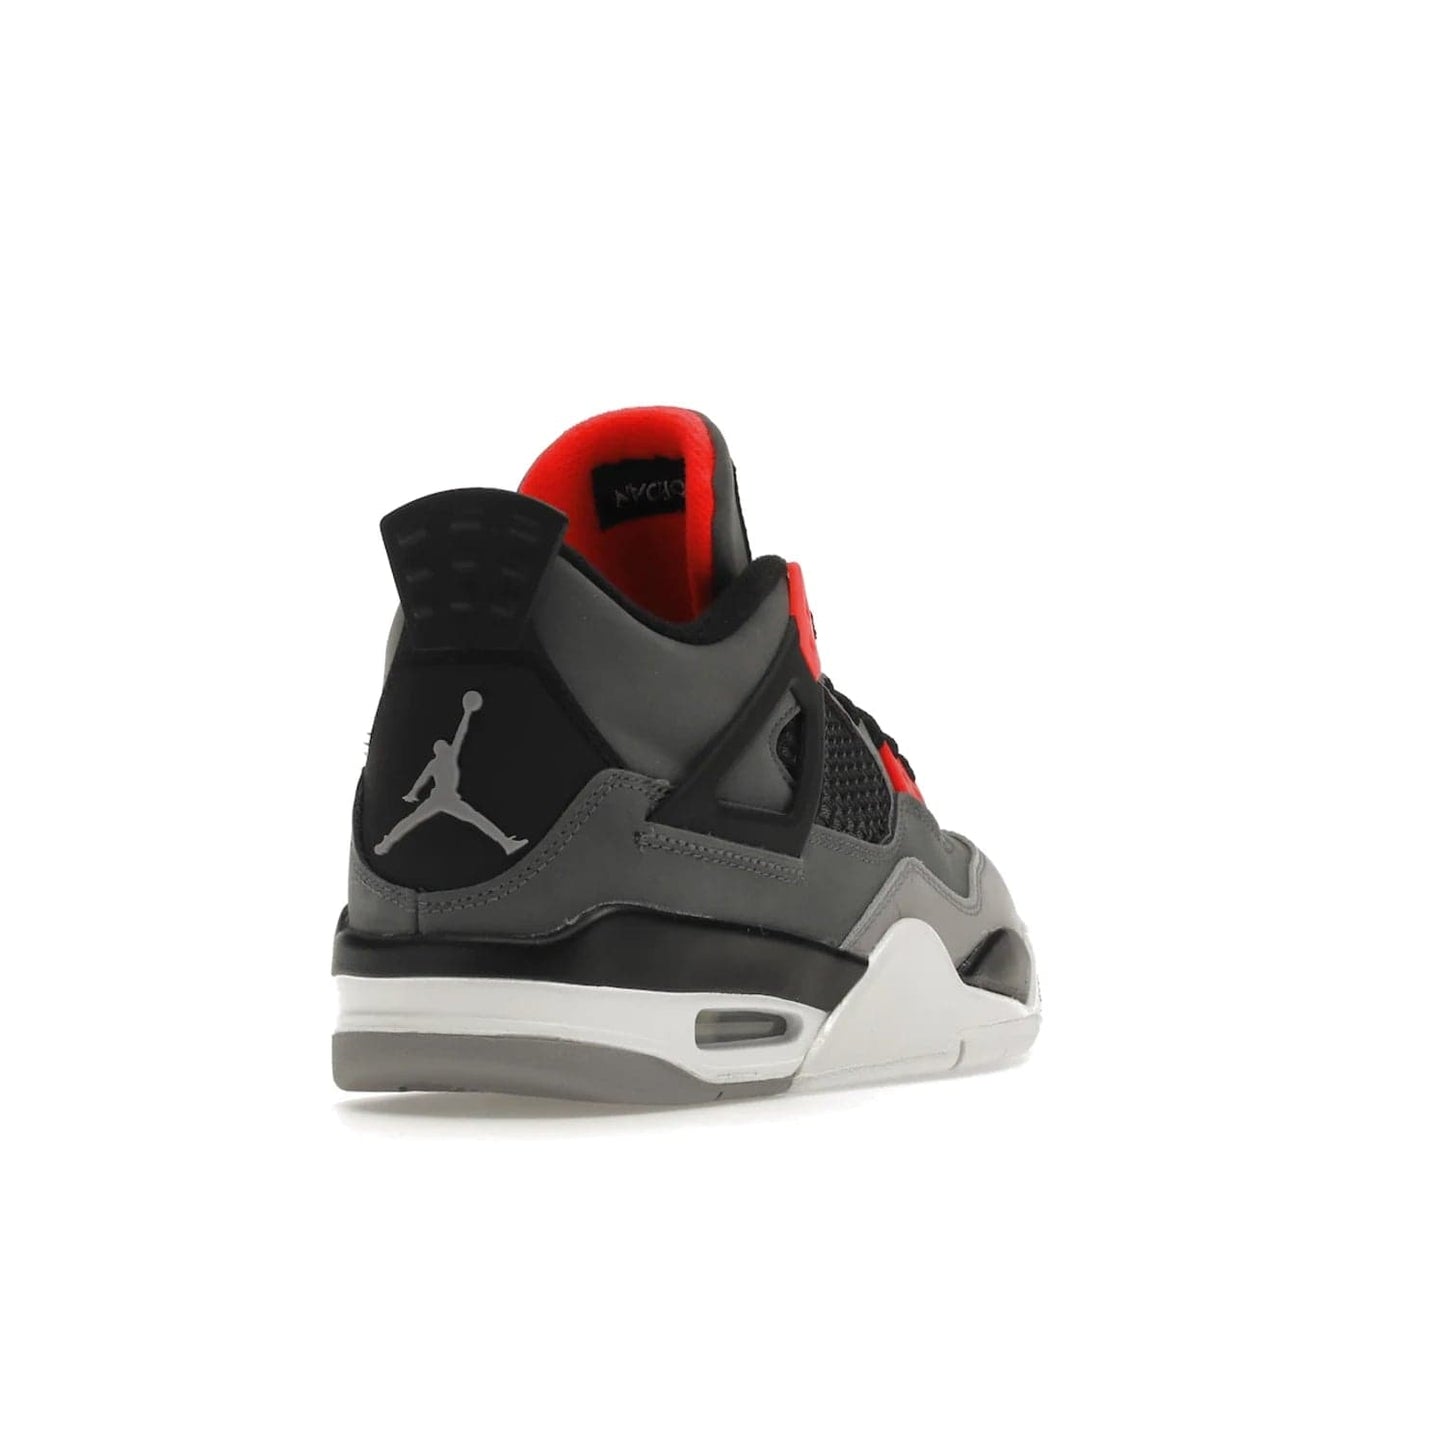 Jordan 4 Retro Infrared (GS) - Image 31 - Only at www.BallersClubKickz.com - Shop the Air Jordan 4 Retro Infrared (GS) for a classic silhouette with subtle yet bold features. Dark grey nubuck upper with lighter forefoot overlay, black accents, Infrared molded eyelets & woven tongue tag. Available June 2022.